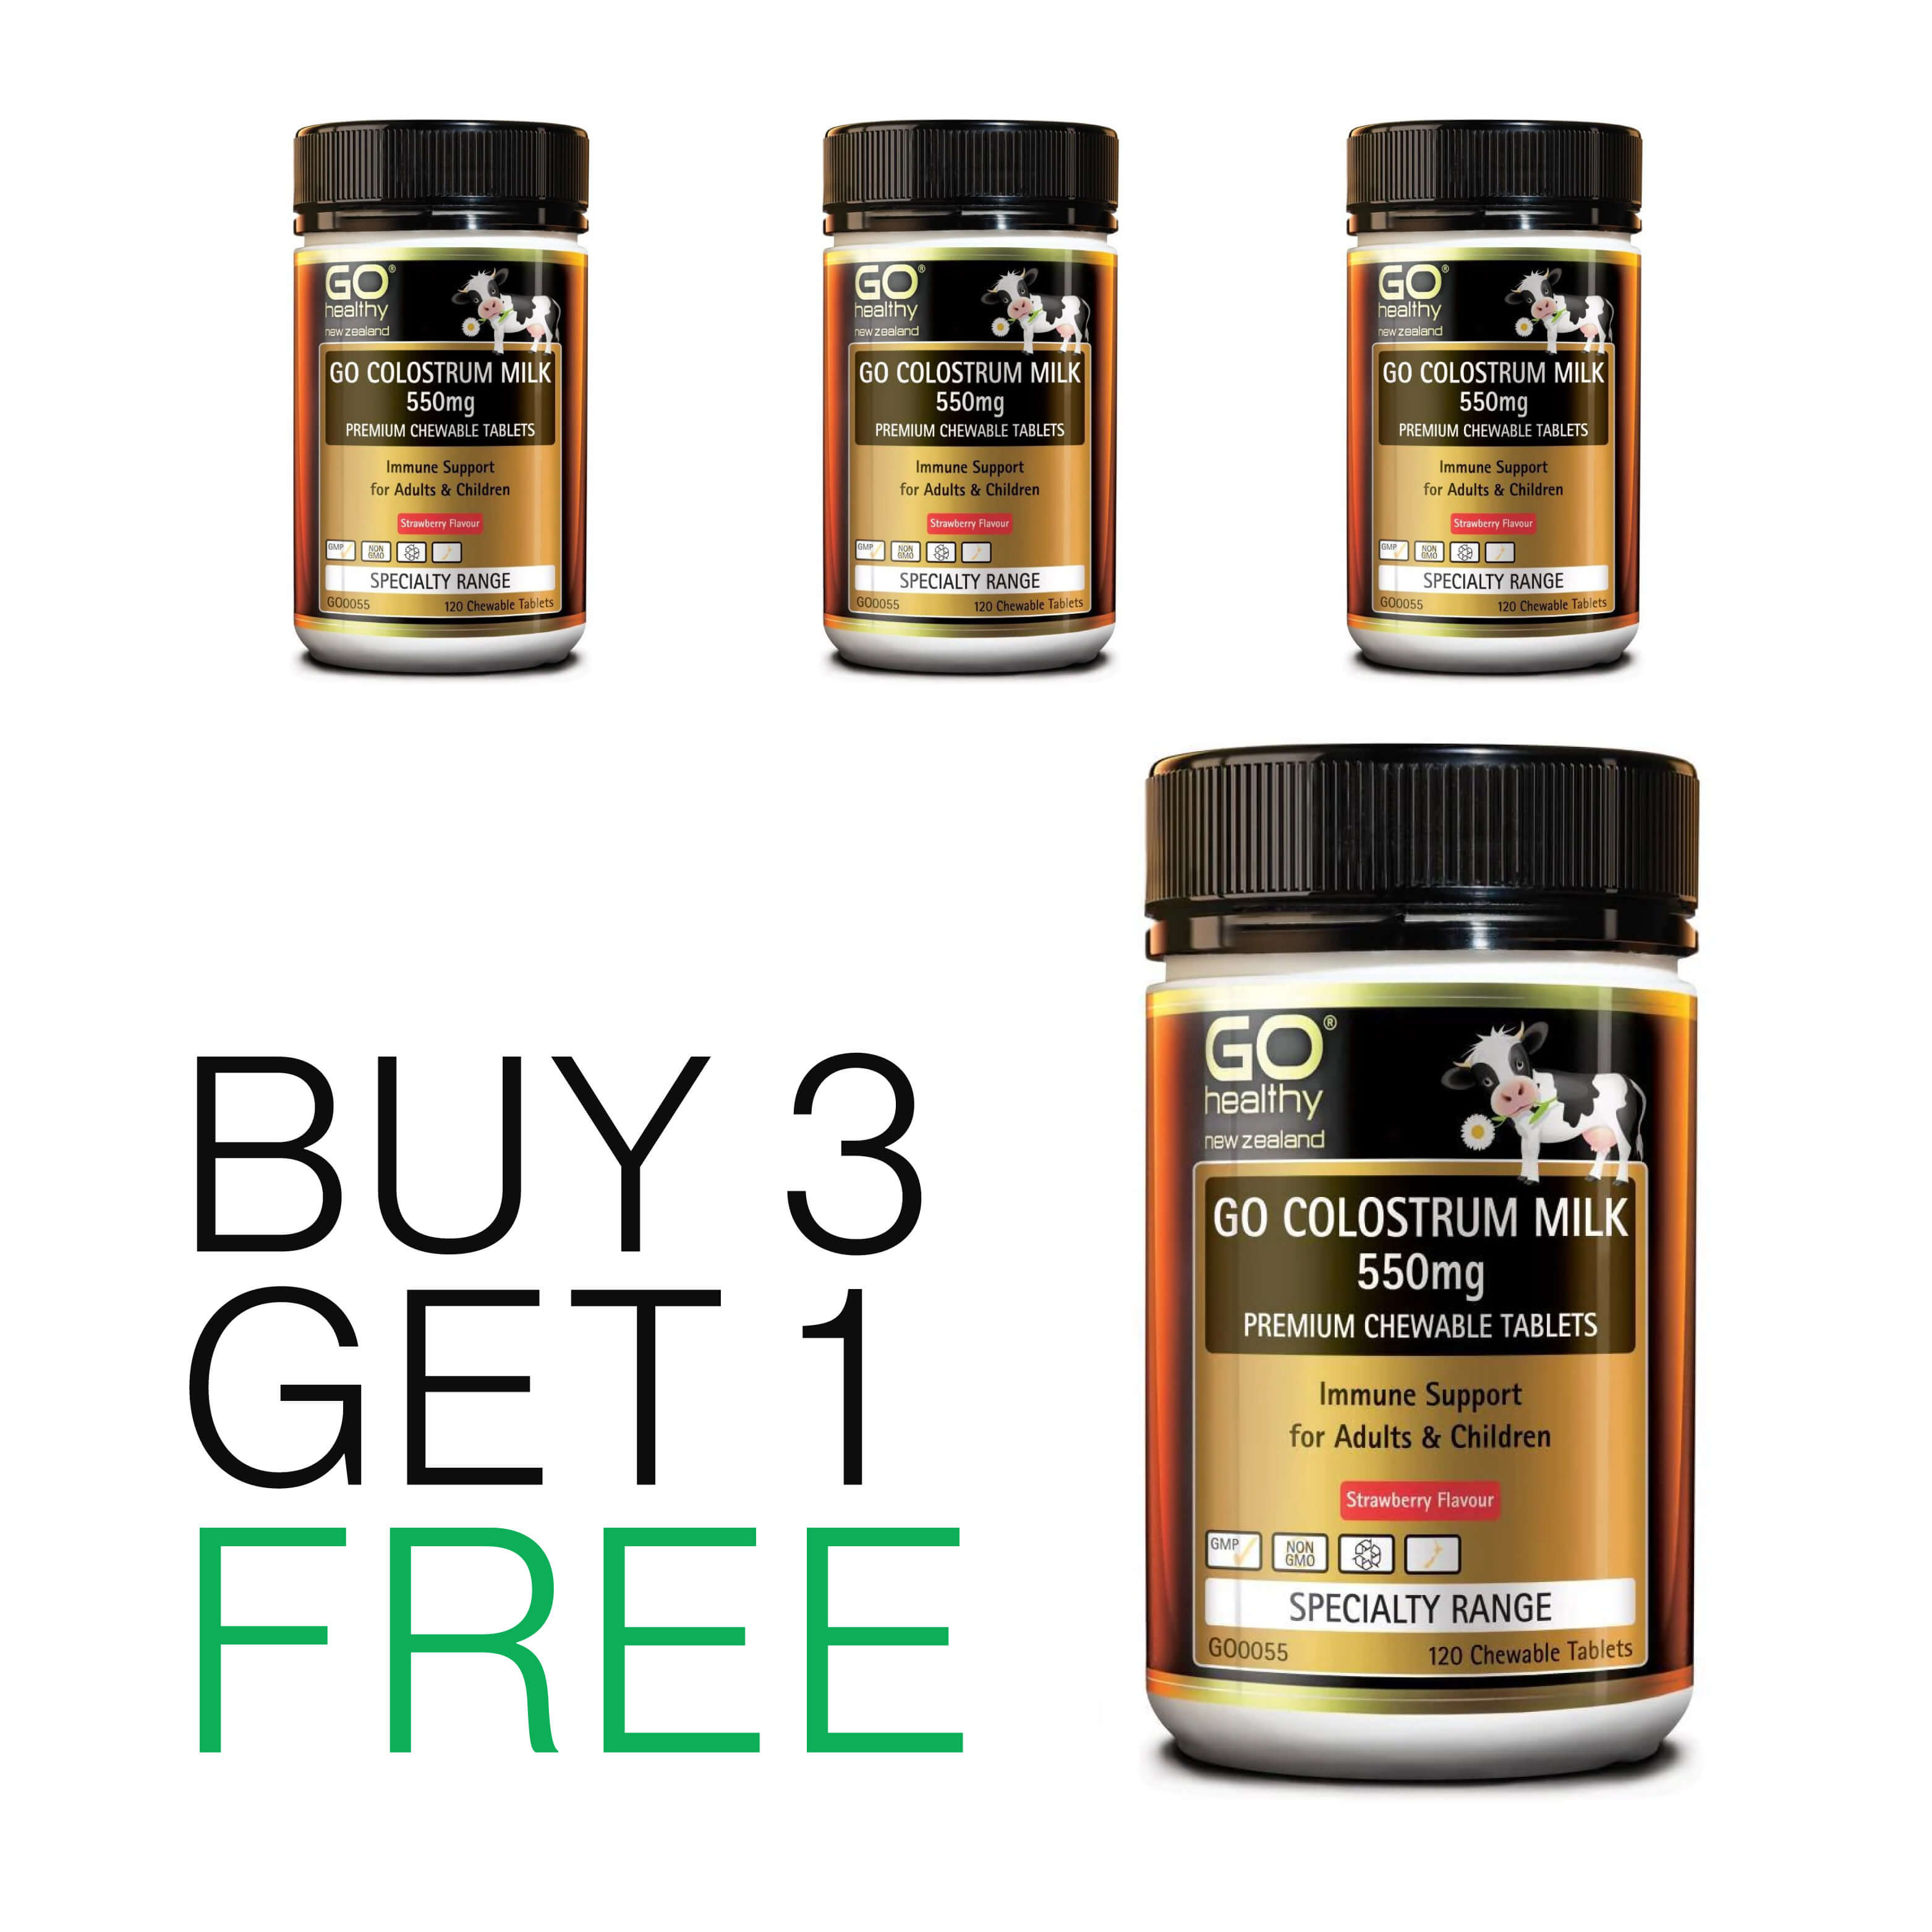 Buy 3 Get 1 Free - Go Healthy Go Colostrum Milk 550mg 120 Chewable tablets